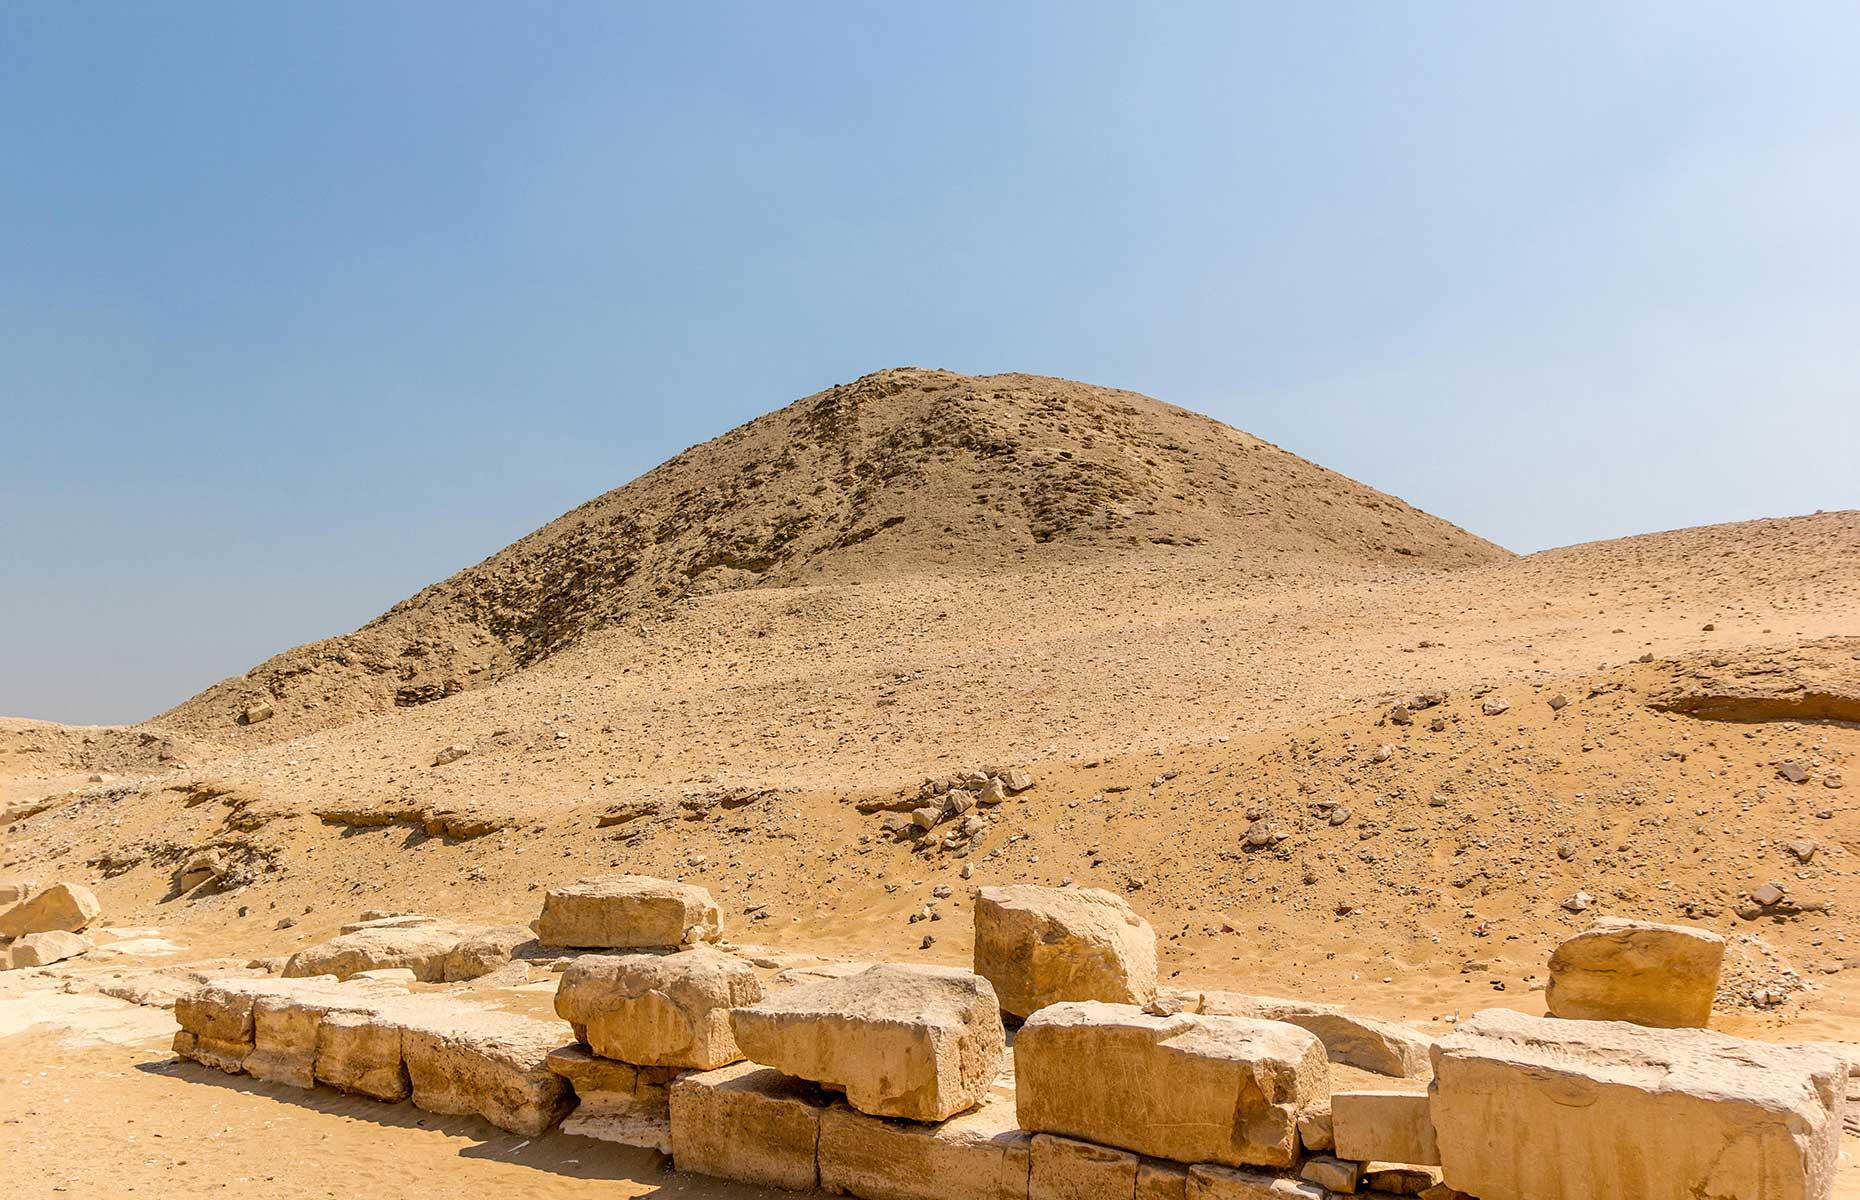 <p>The Teti Pyramid was once 172 feet (52.5m) tall and housed the deceased King Teti, the first pharaoh of the Sixth Dynasty (roughly 2345-2323 BC, although sources vary). Located in Saqqara, the pyramid was constructed with a core of stone blocks encased in limestone. Inside were typical painted reliefs depicting offerings to the gods, plus star-patterned ceilings and three niches which may have held statues of the king. Today the site looks more like a lopsided mound, but it isn't completely collapsed and you can still take a tour inside.</p>